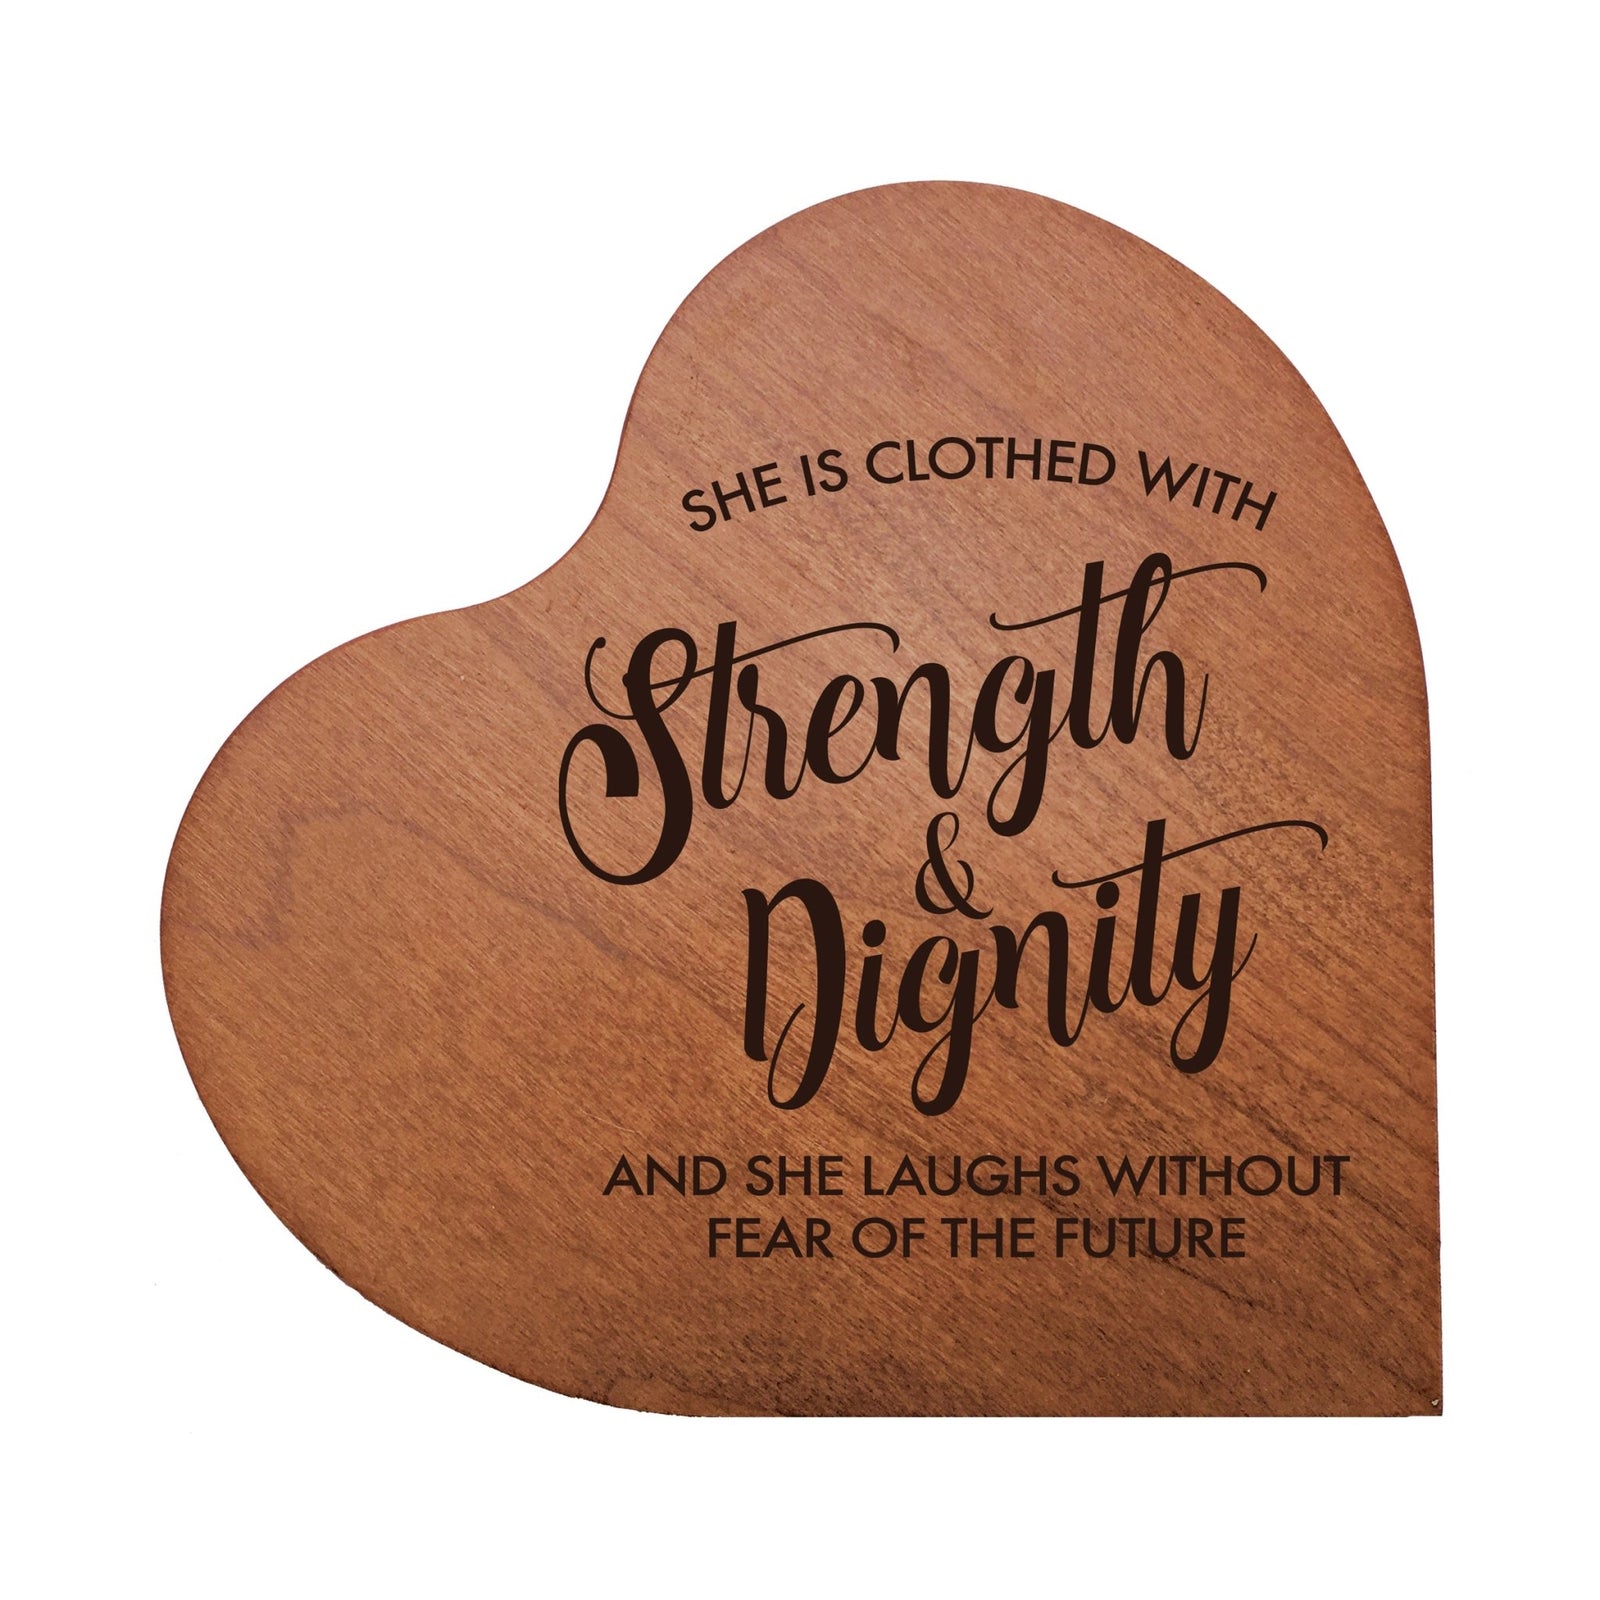 Engraved Wooden Heart Block 5” x 5.25” x 0.75”- Strength And Dignity - LifeSong Milestones